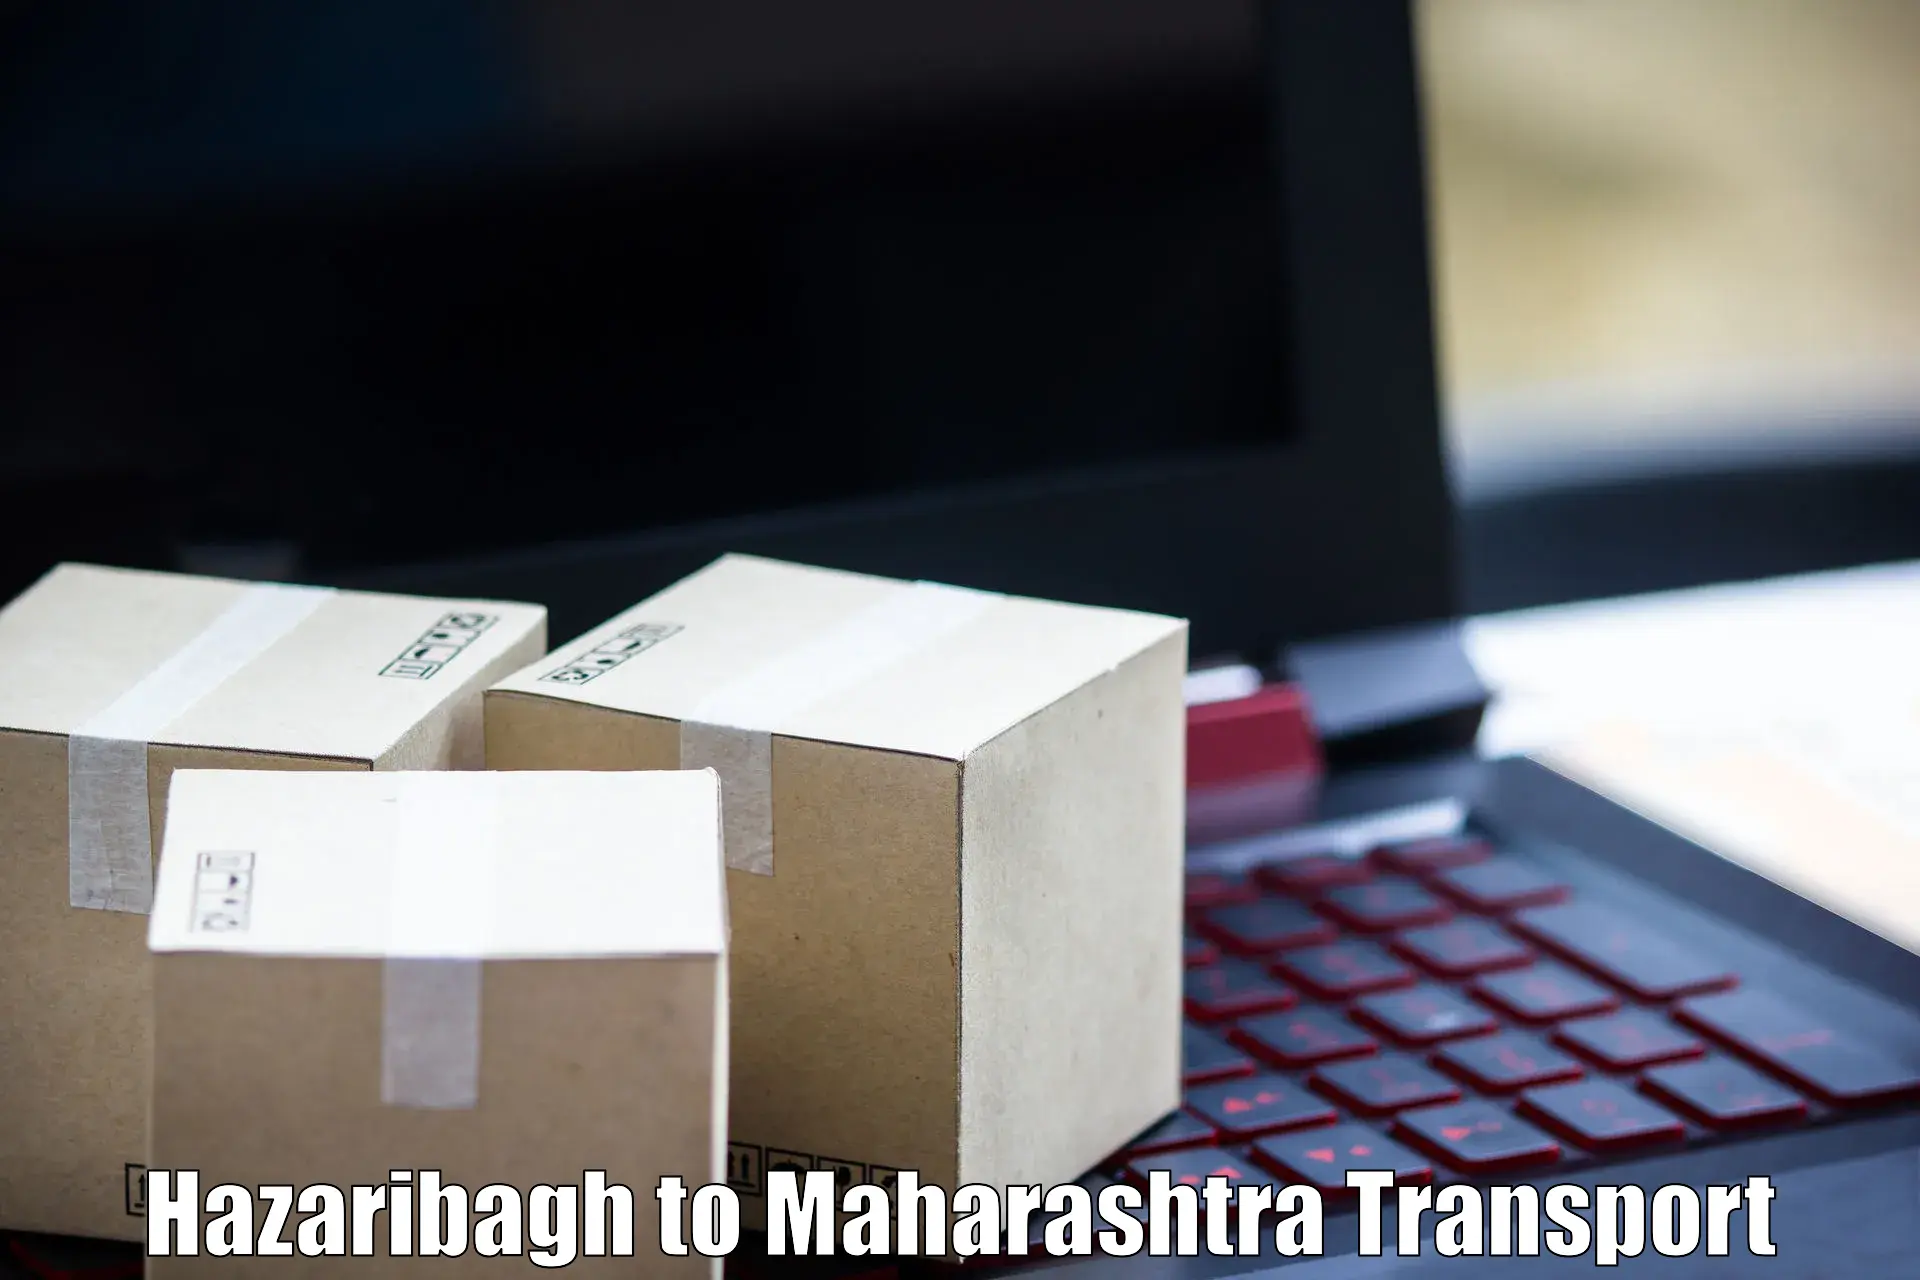 Air freight transport services Hazaribagh to Khed